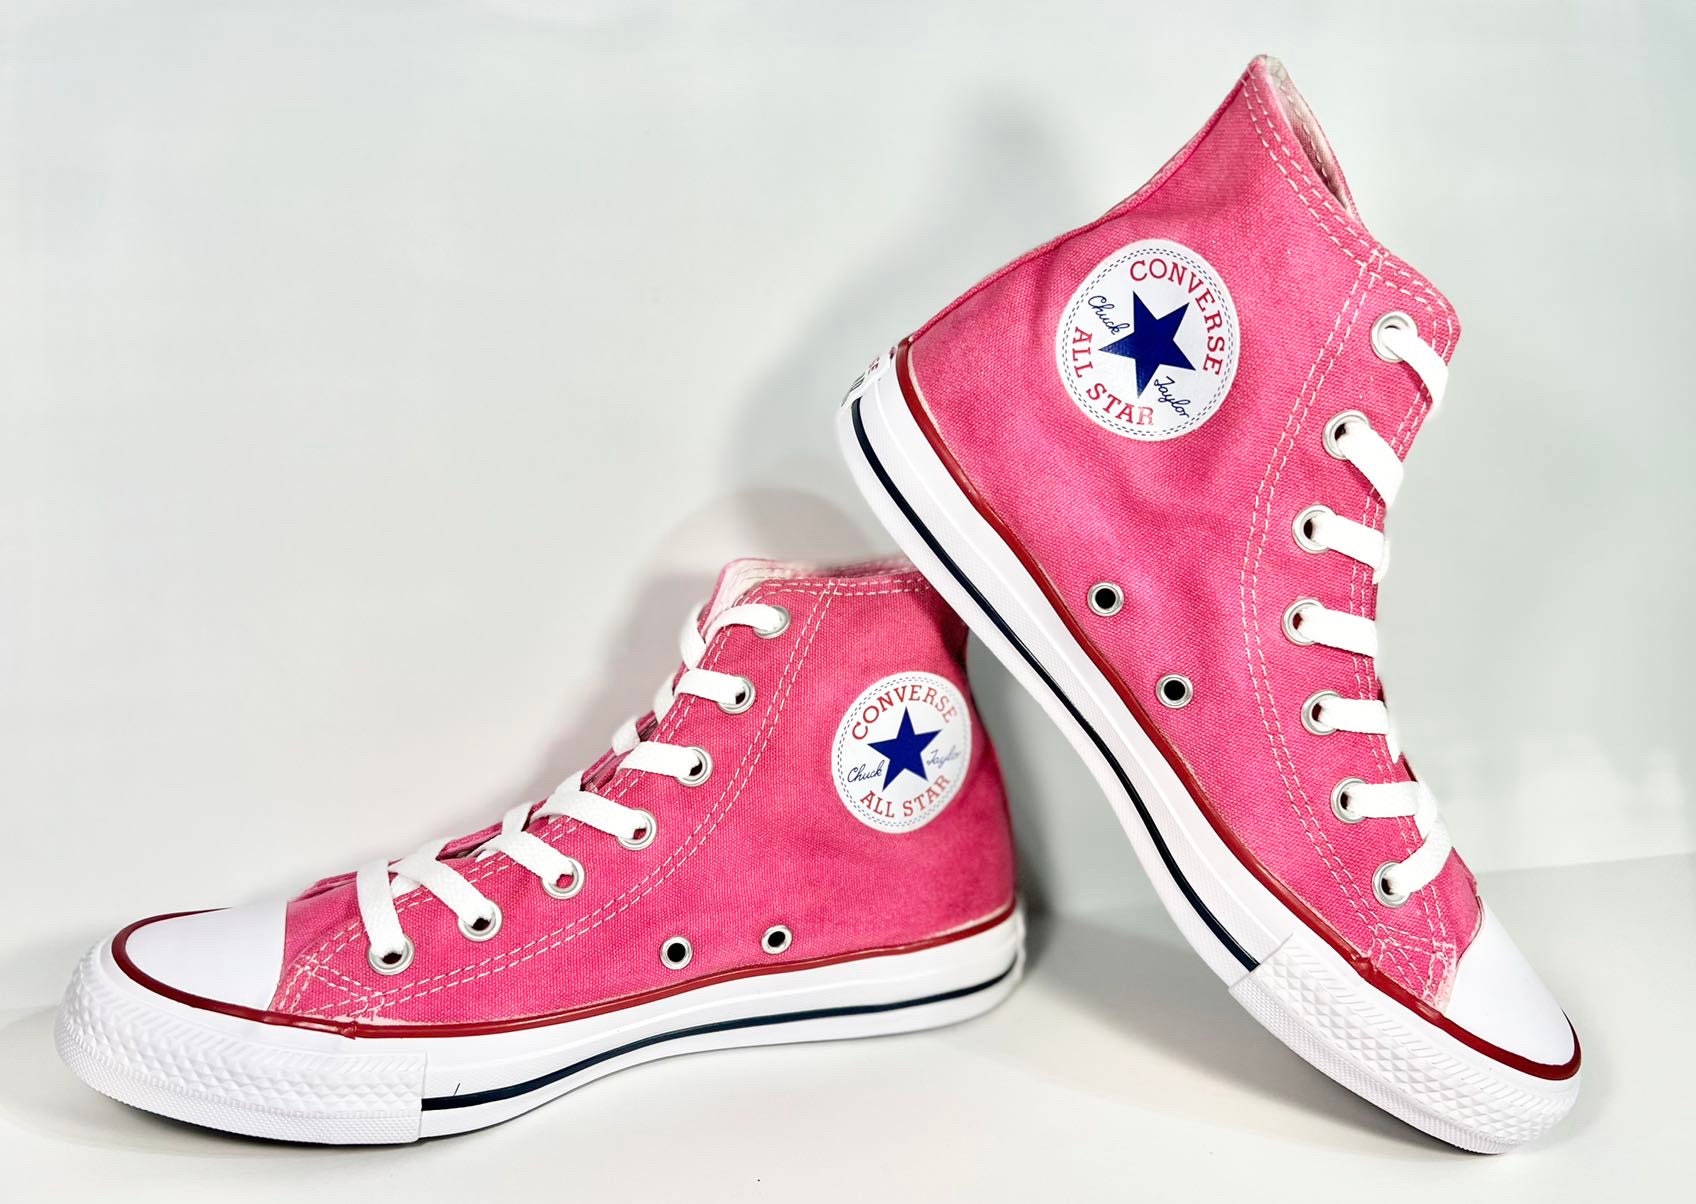 referir Diverso Motear Custom Dyed Hot Pink Converse All Star High Tops Shoes - Etsy